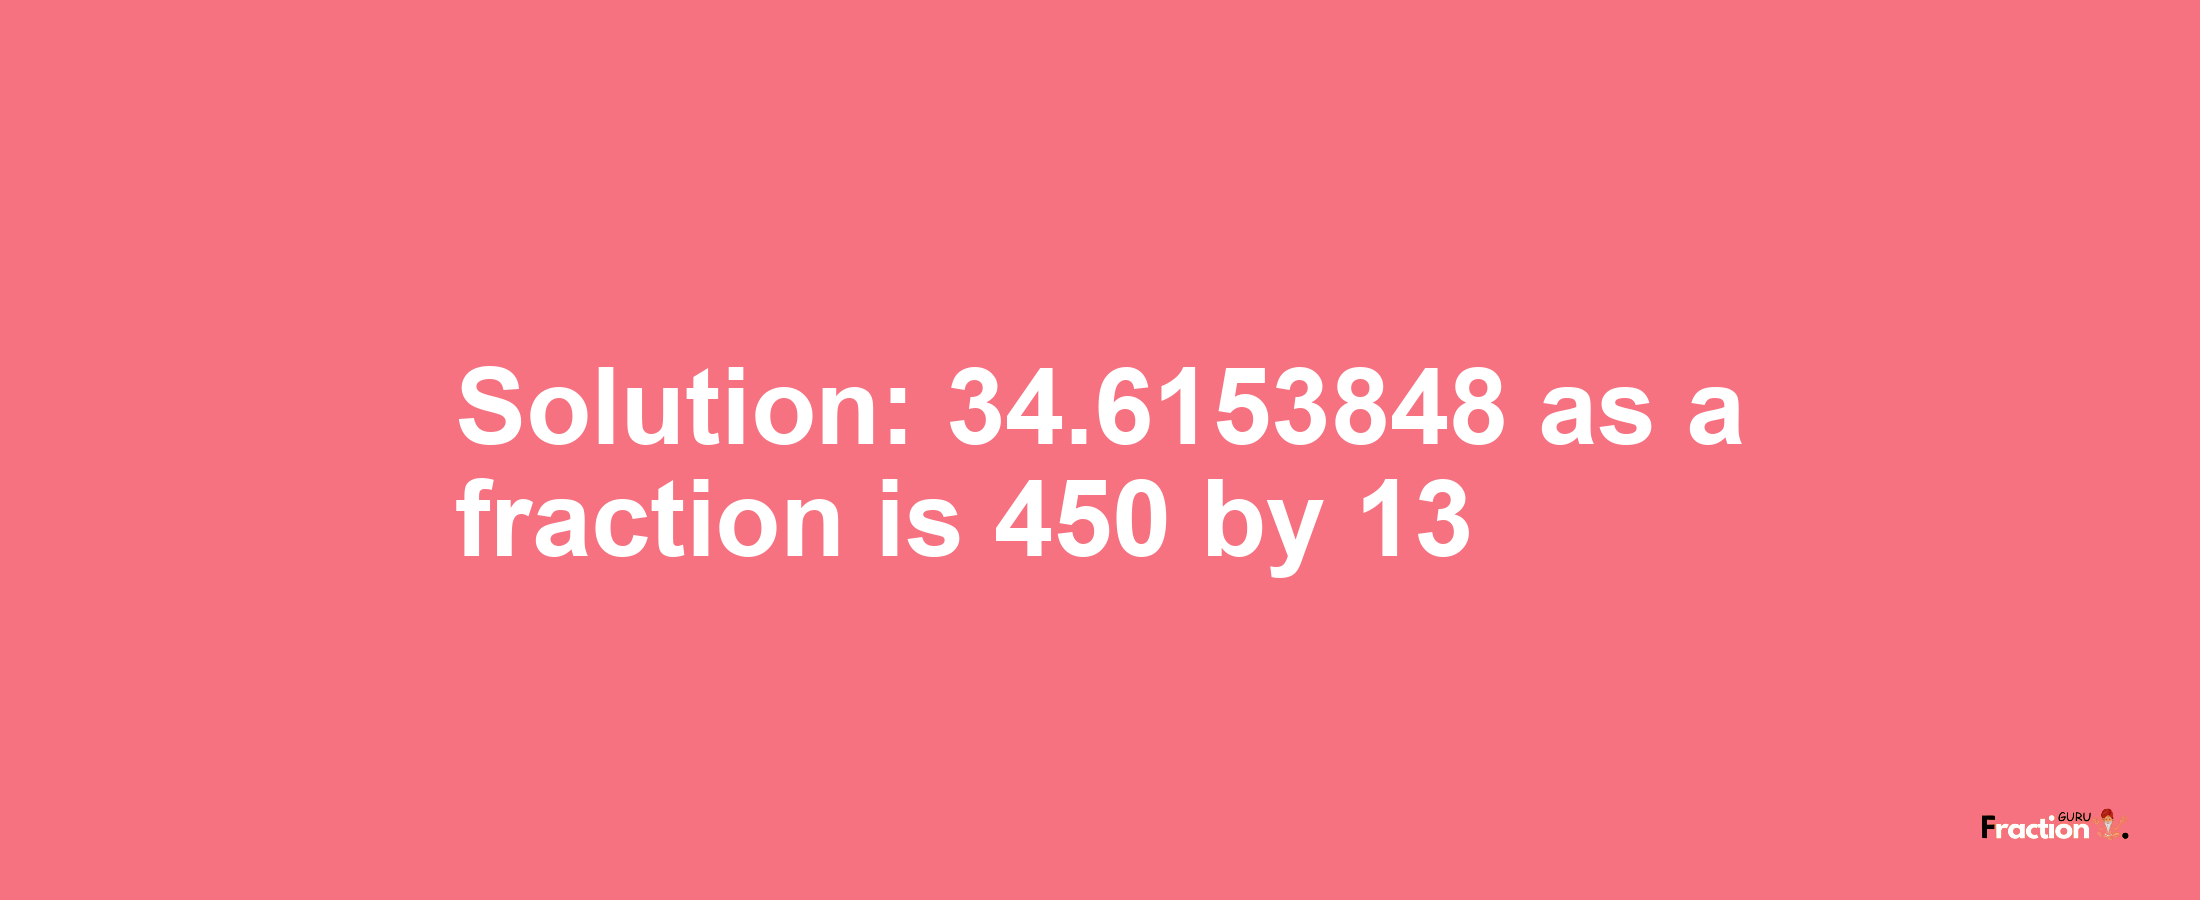 Solution:34.6153848 as a fraction is 450/13